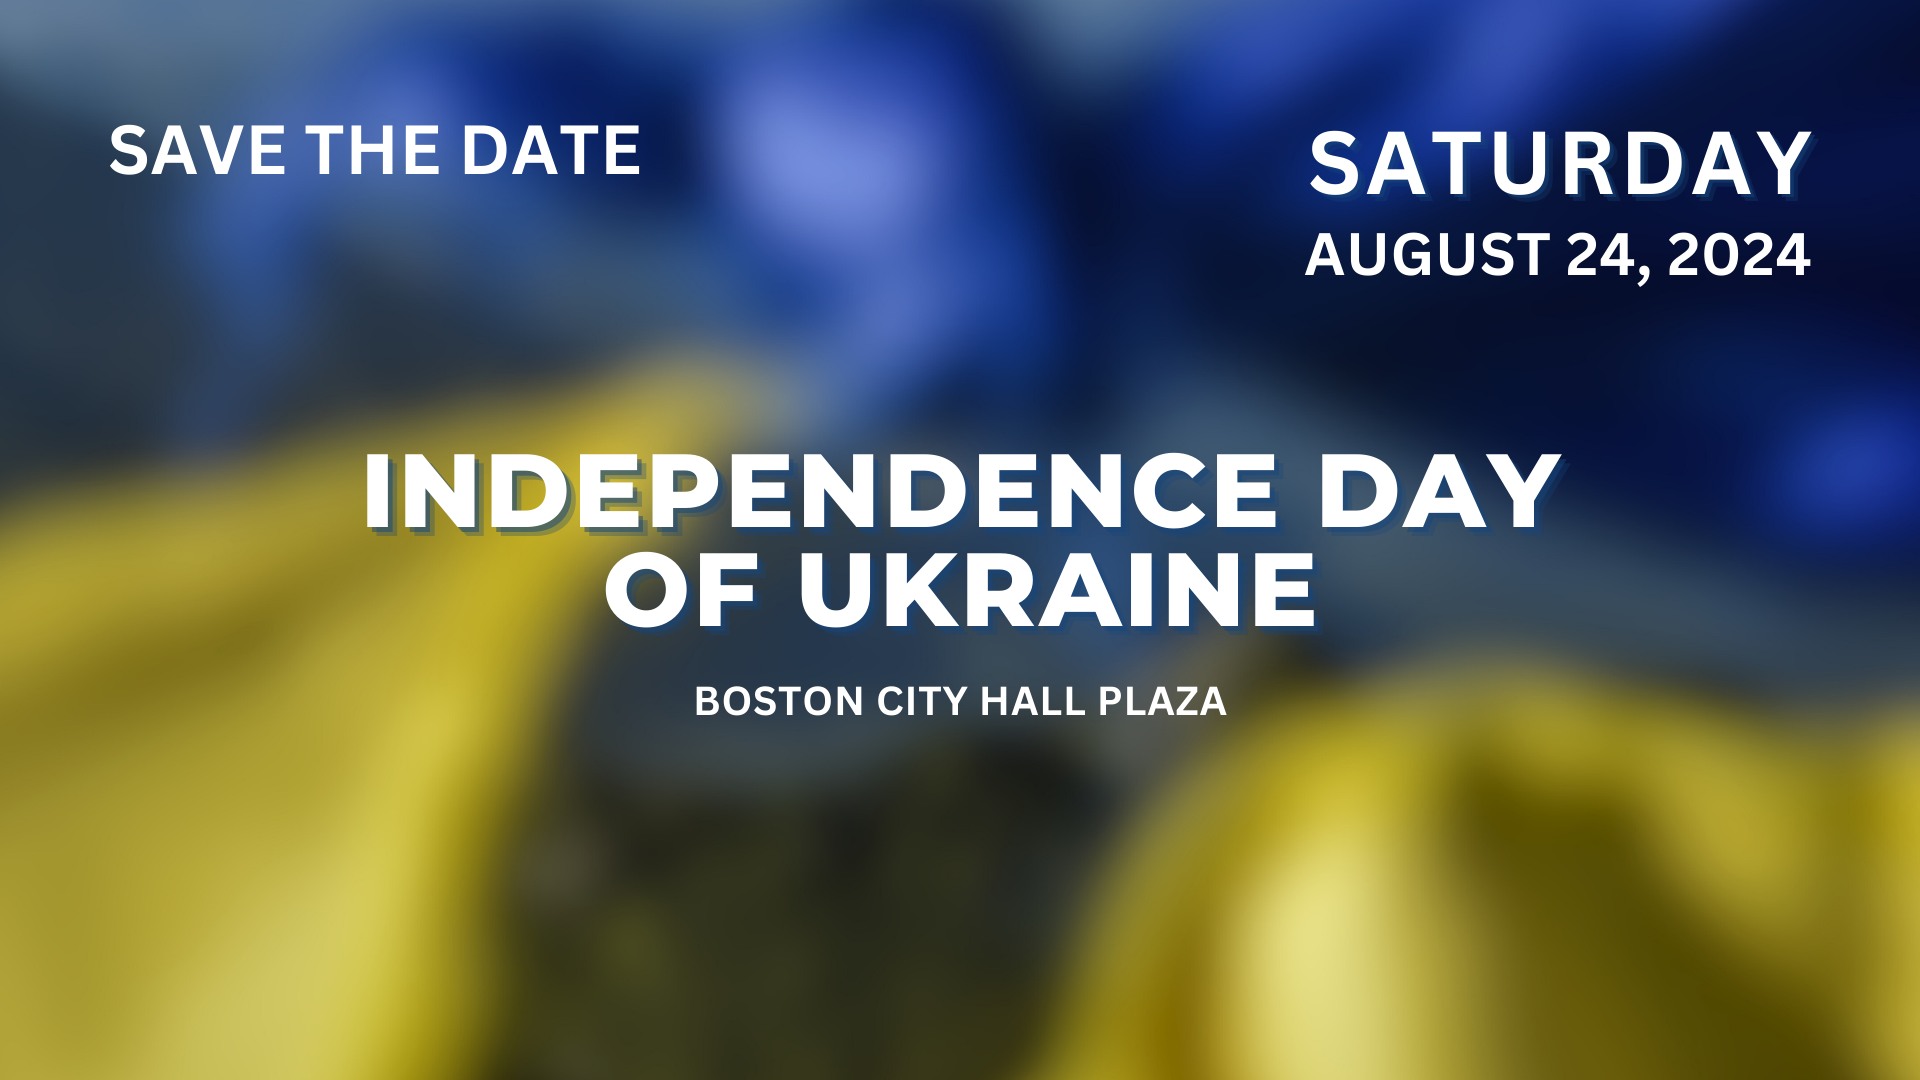 Independence Day of Ukraine in BOSTON